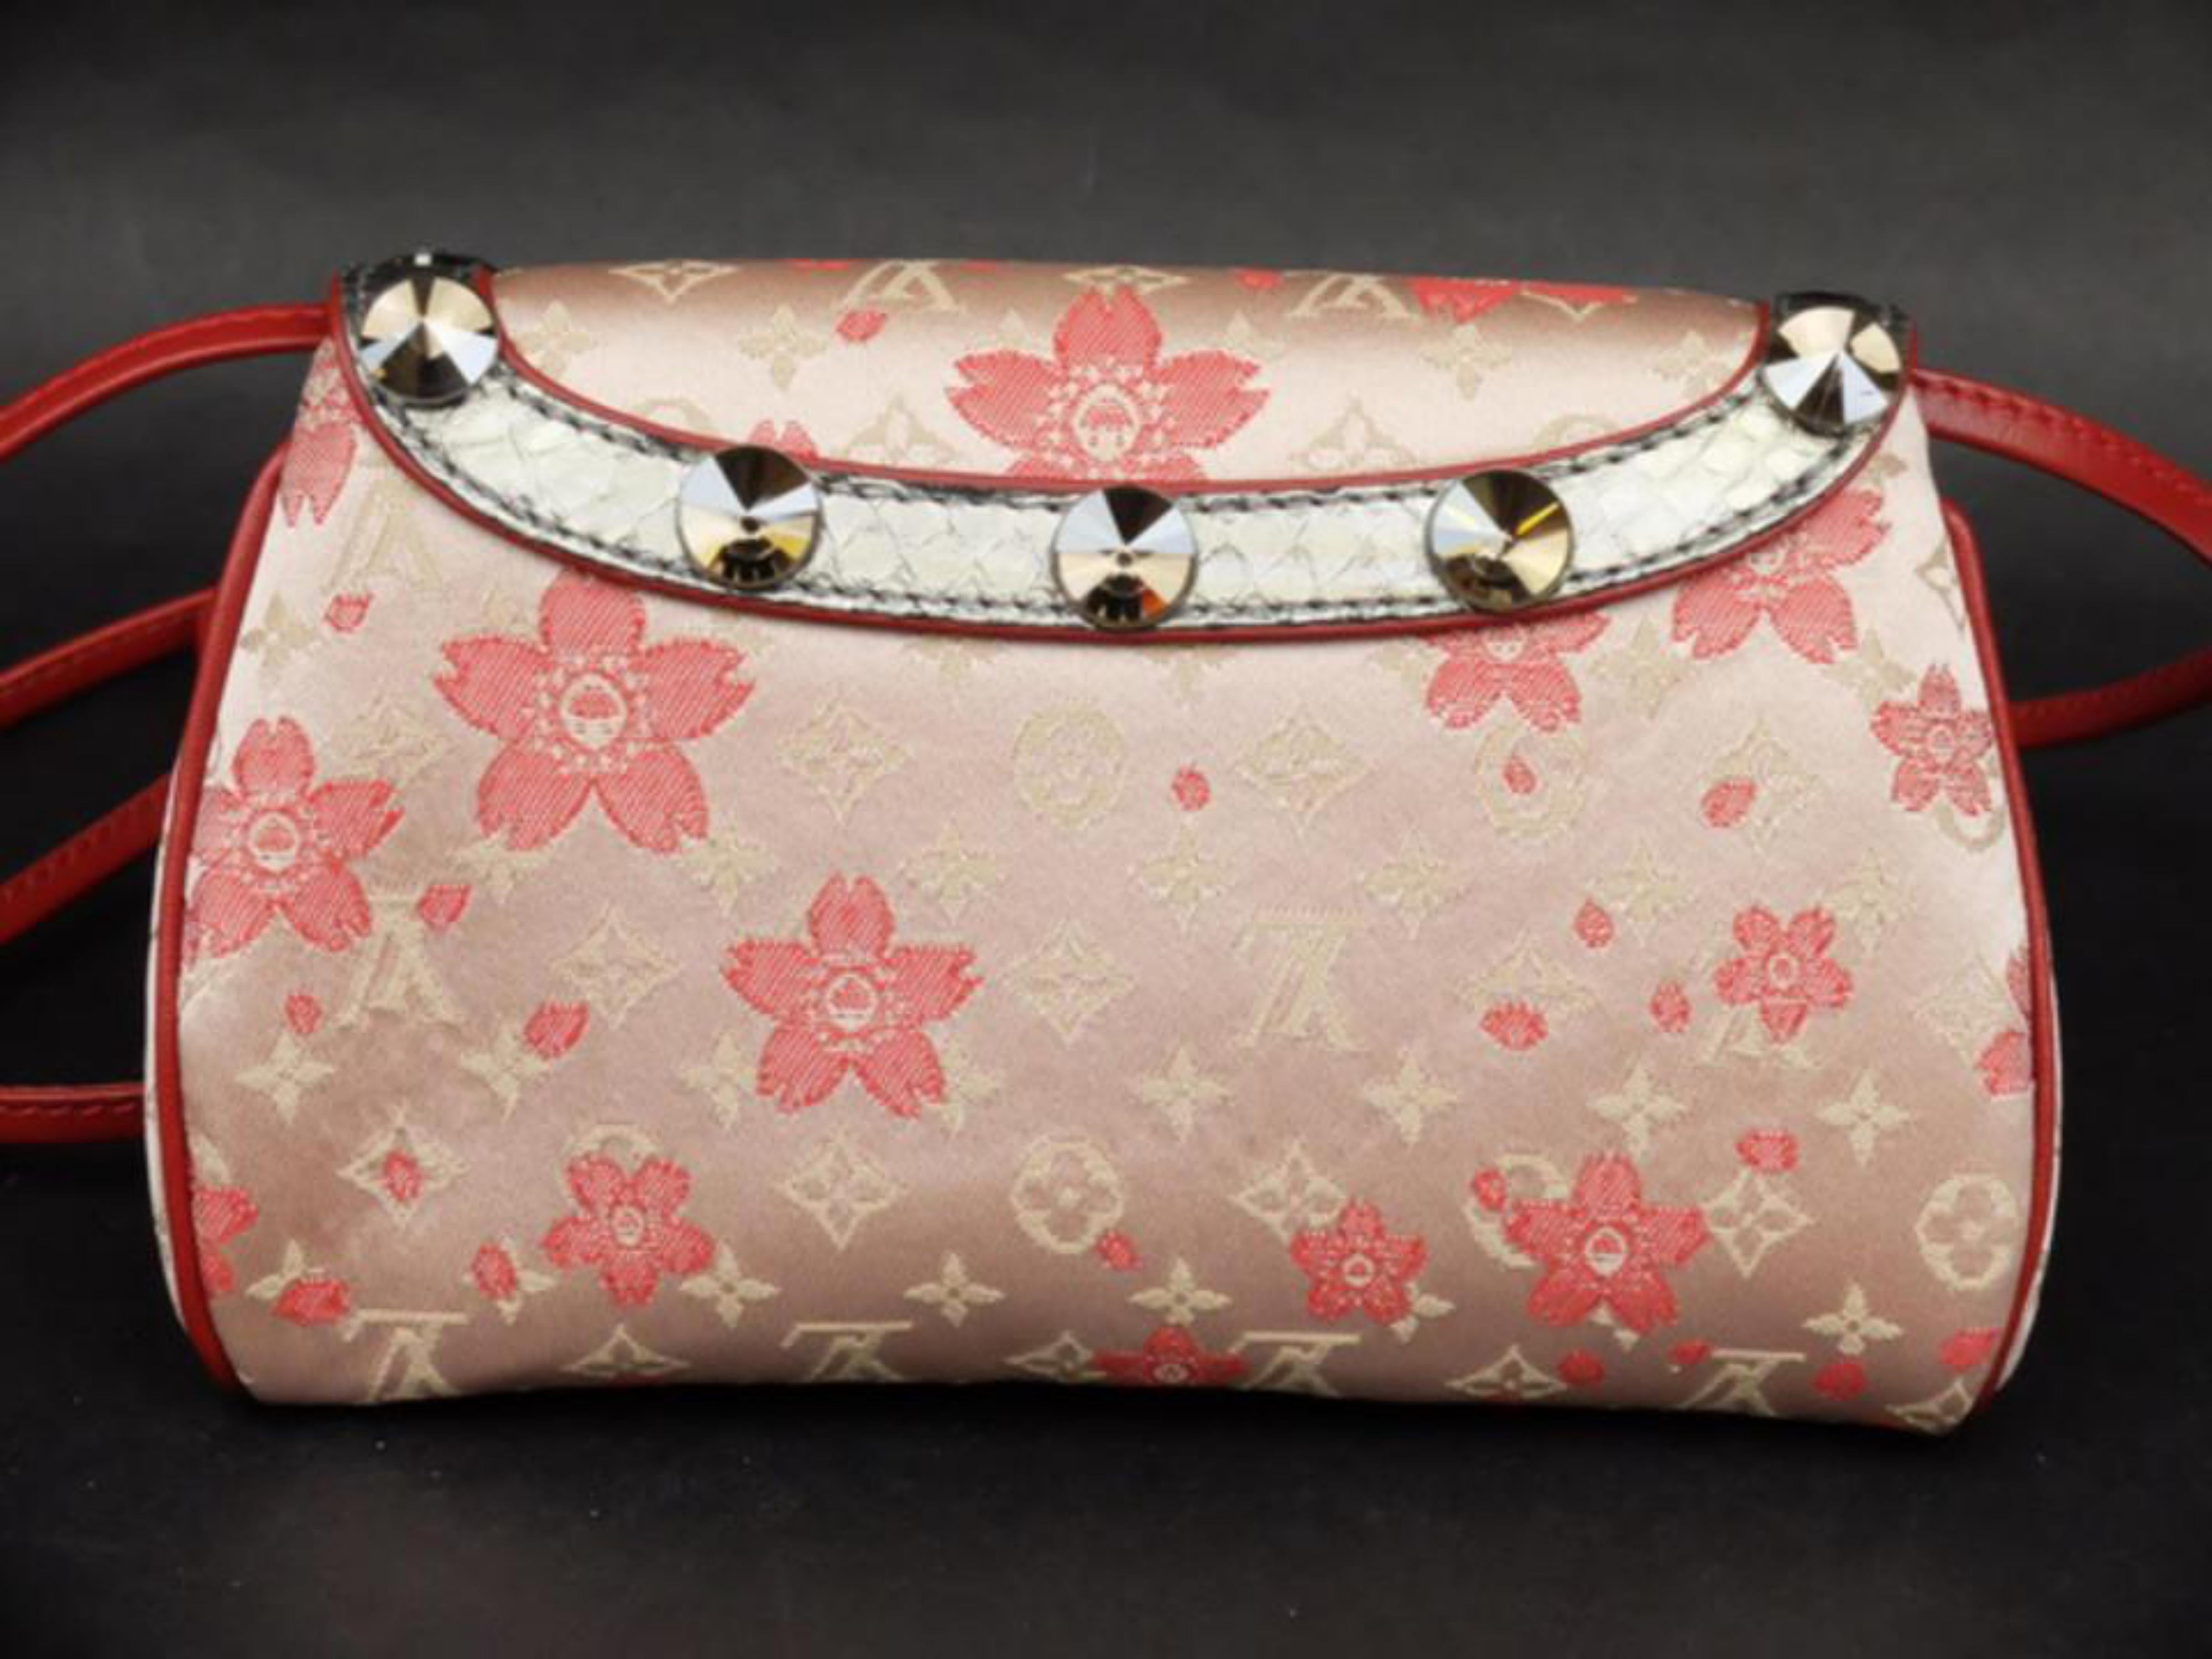 Louis Vuitton (Ultra Rare) Monogram Cherry Blossom Griotte 227924 Cross Body Bag In Excellent Condition For Sale In Forest Hills, NY